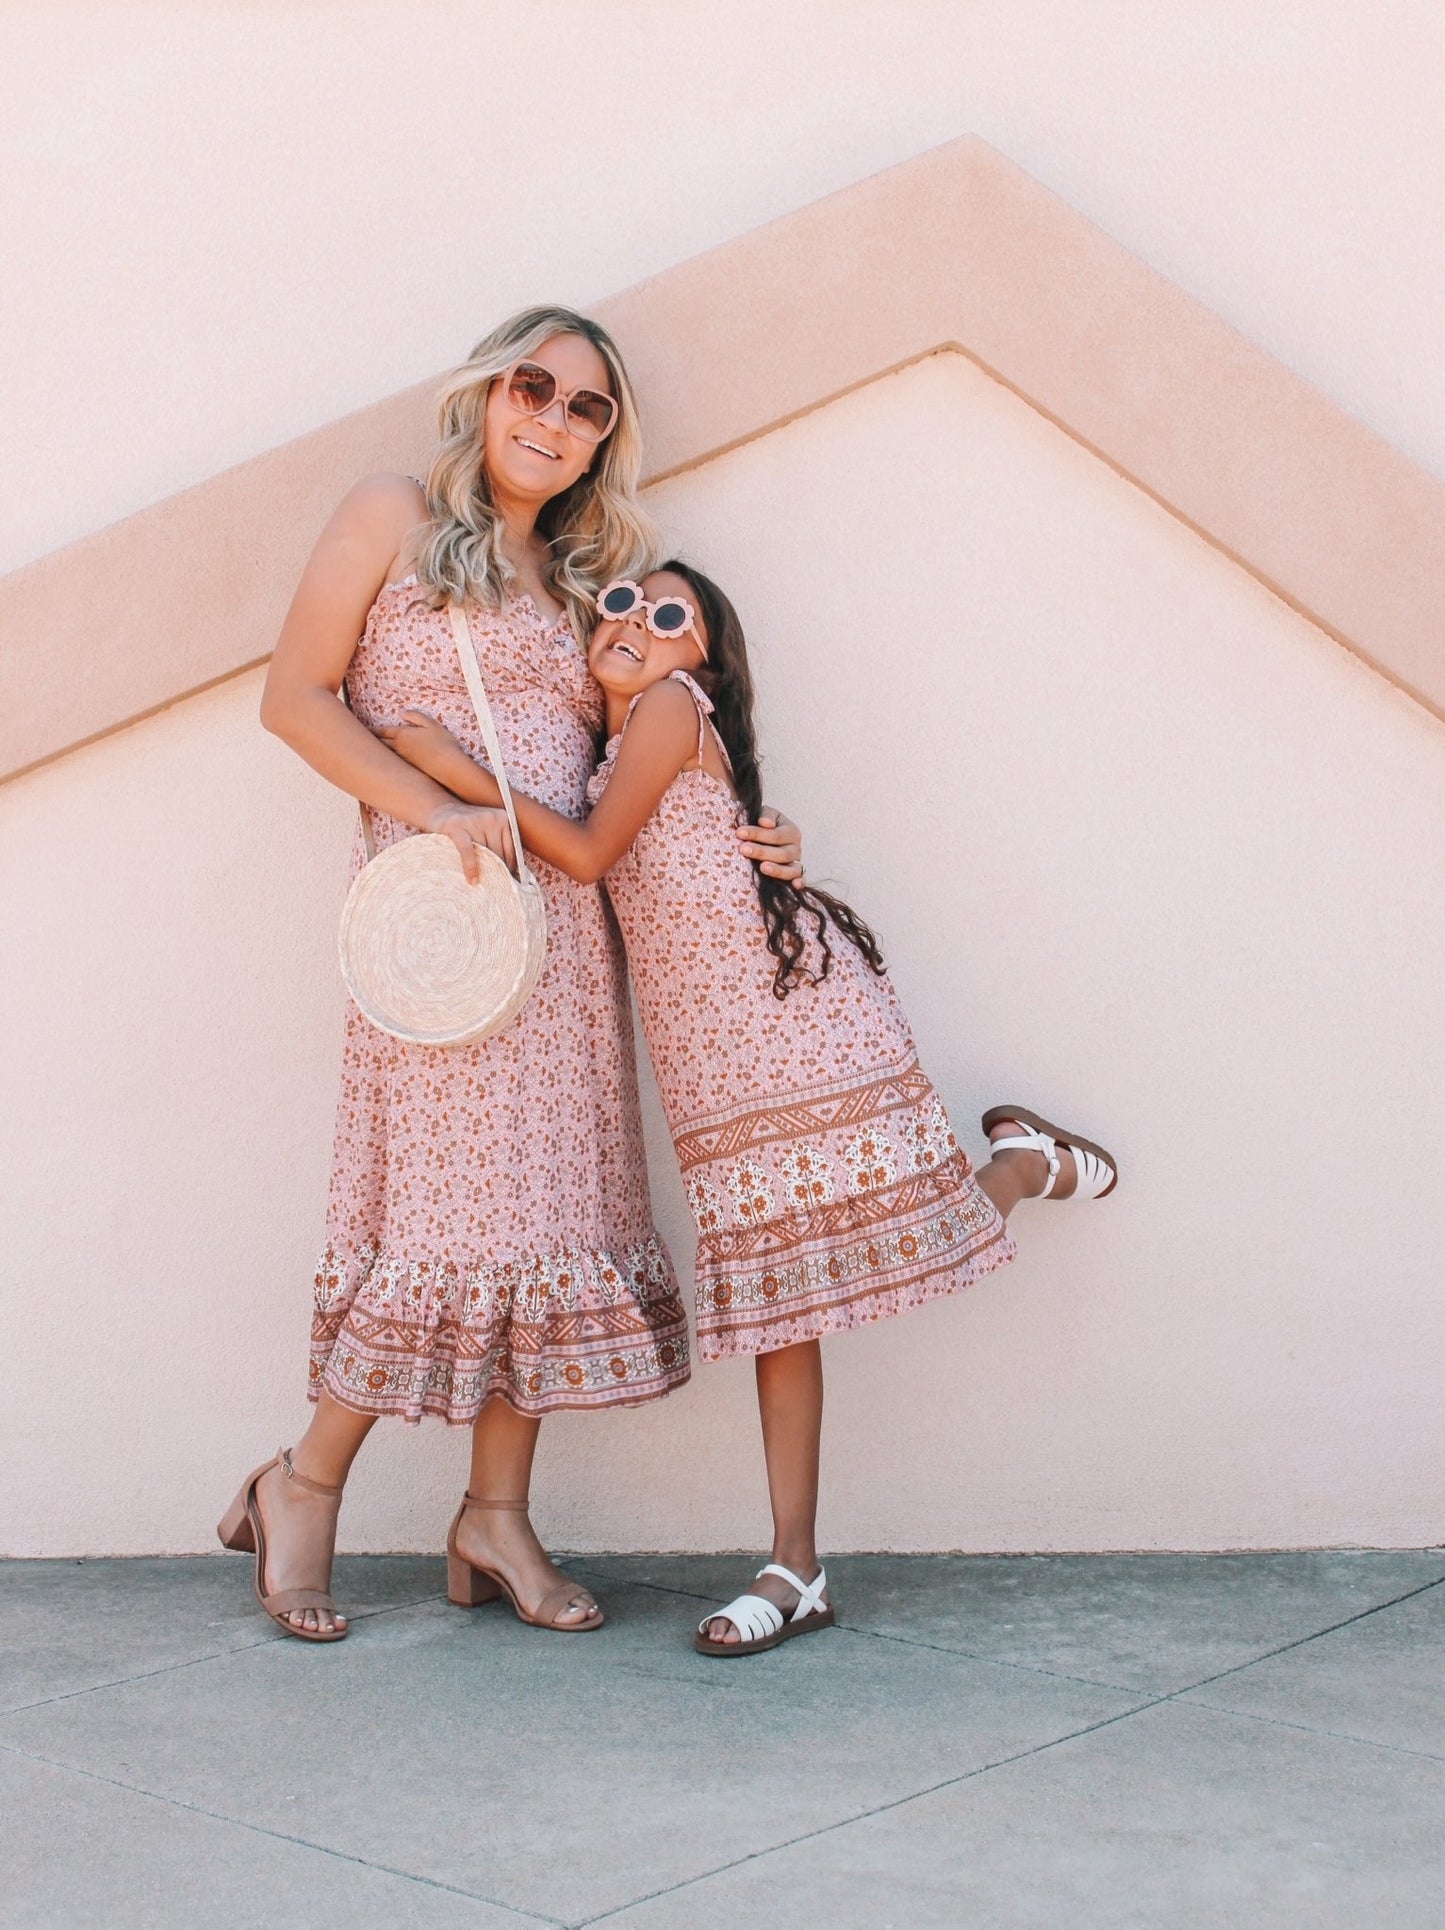 THE BOHEMIAN FLORAL Dress Mommy and Me Matching Dresses - LITTLE MIA BELLA